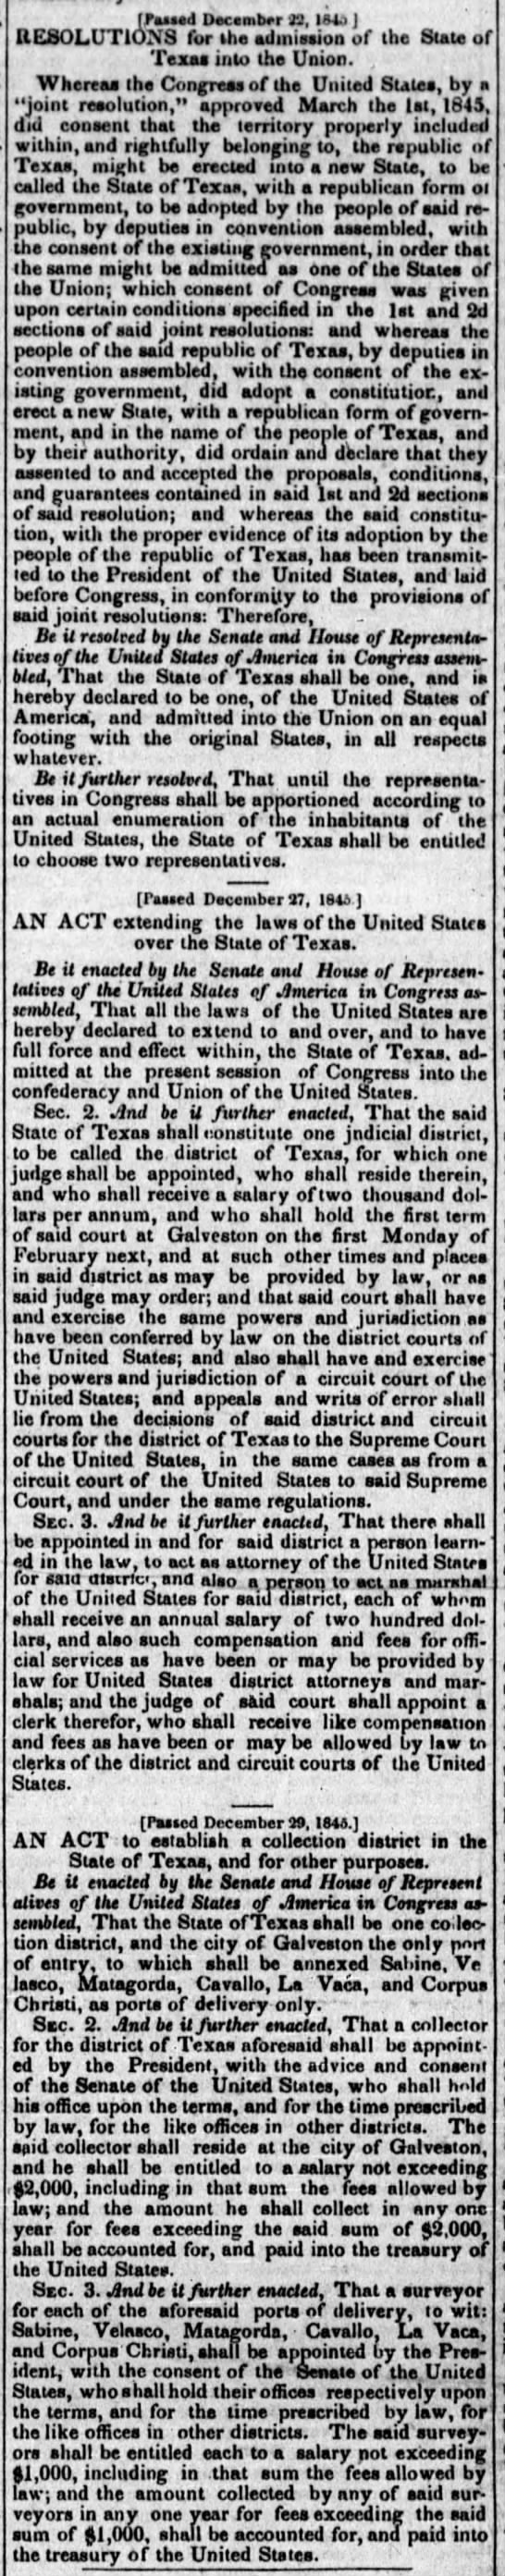 Congressional Resolution Admitting Texas into the Union - 